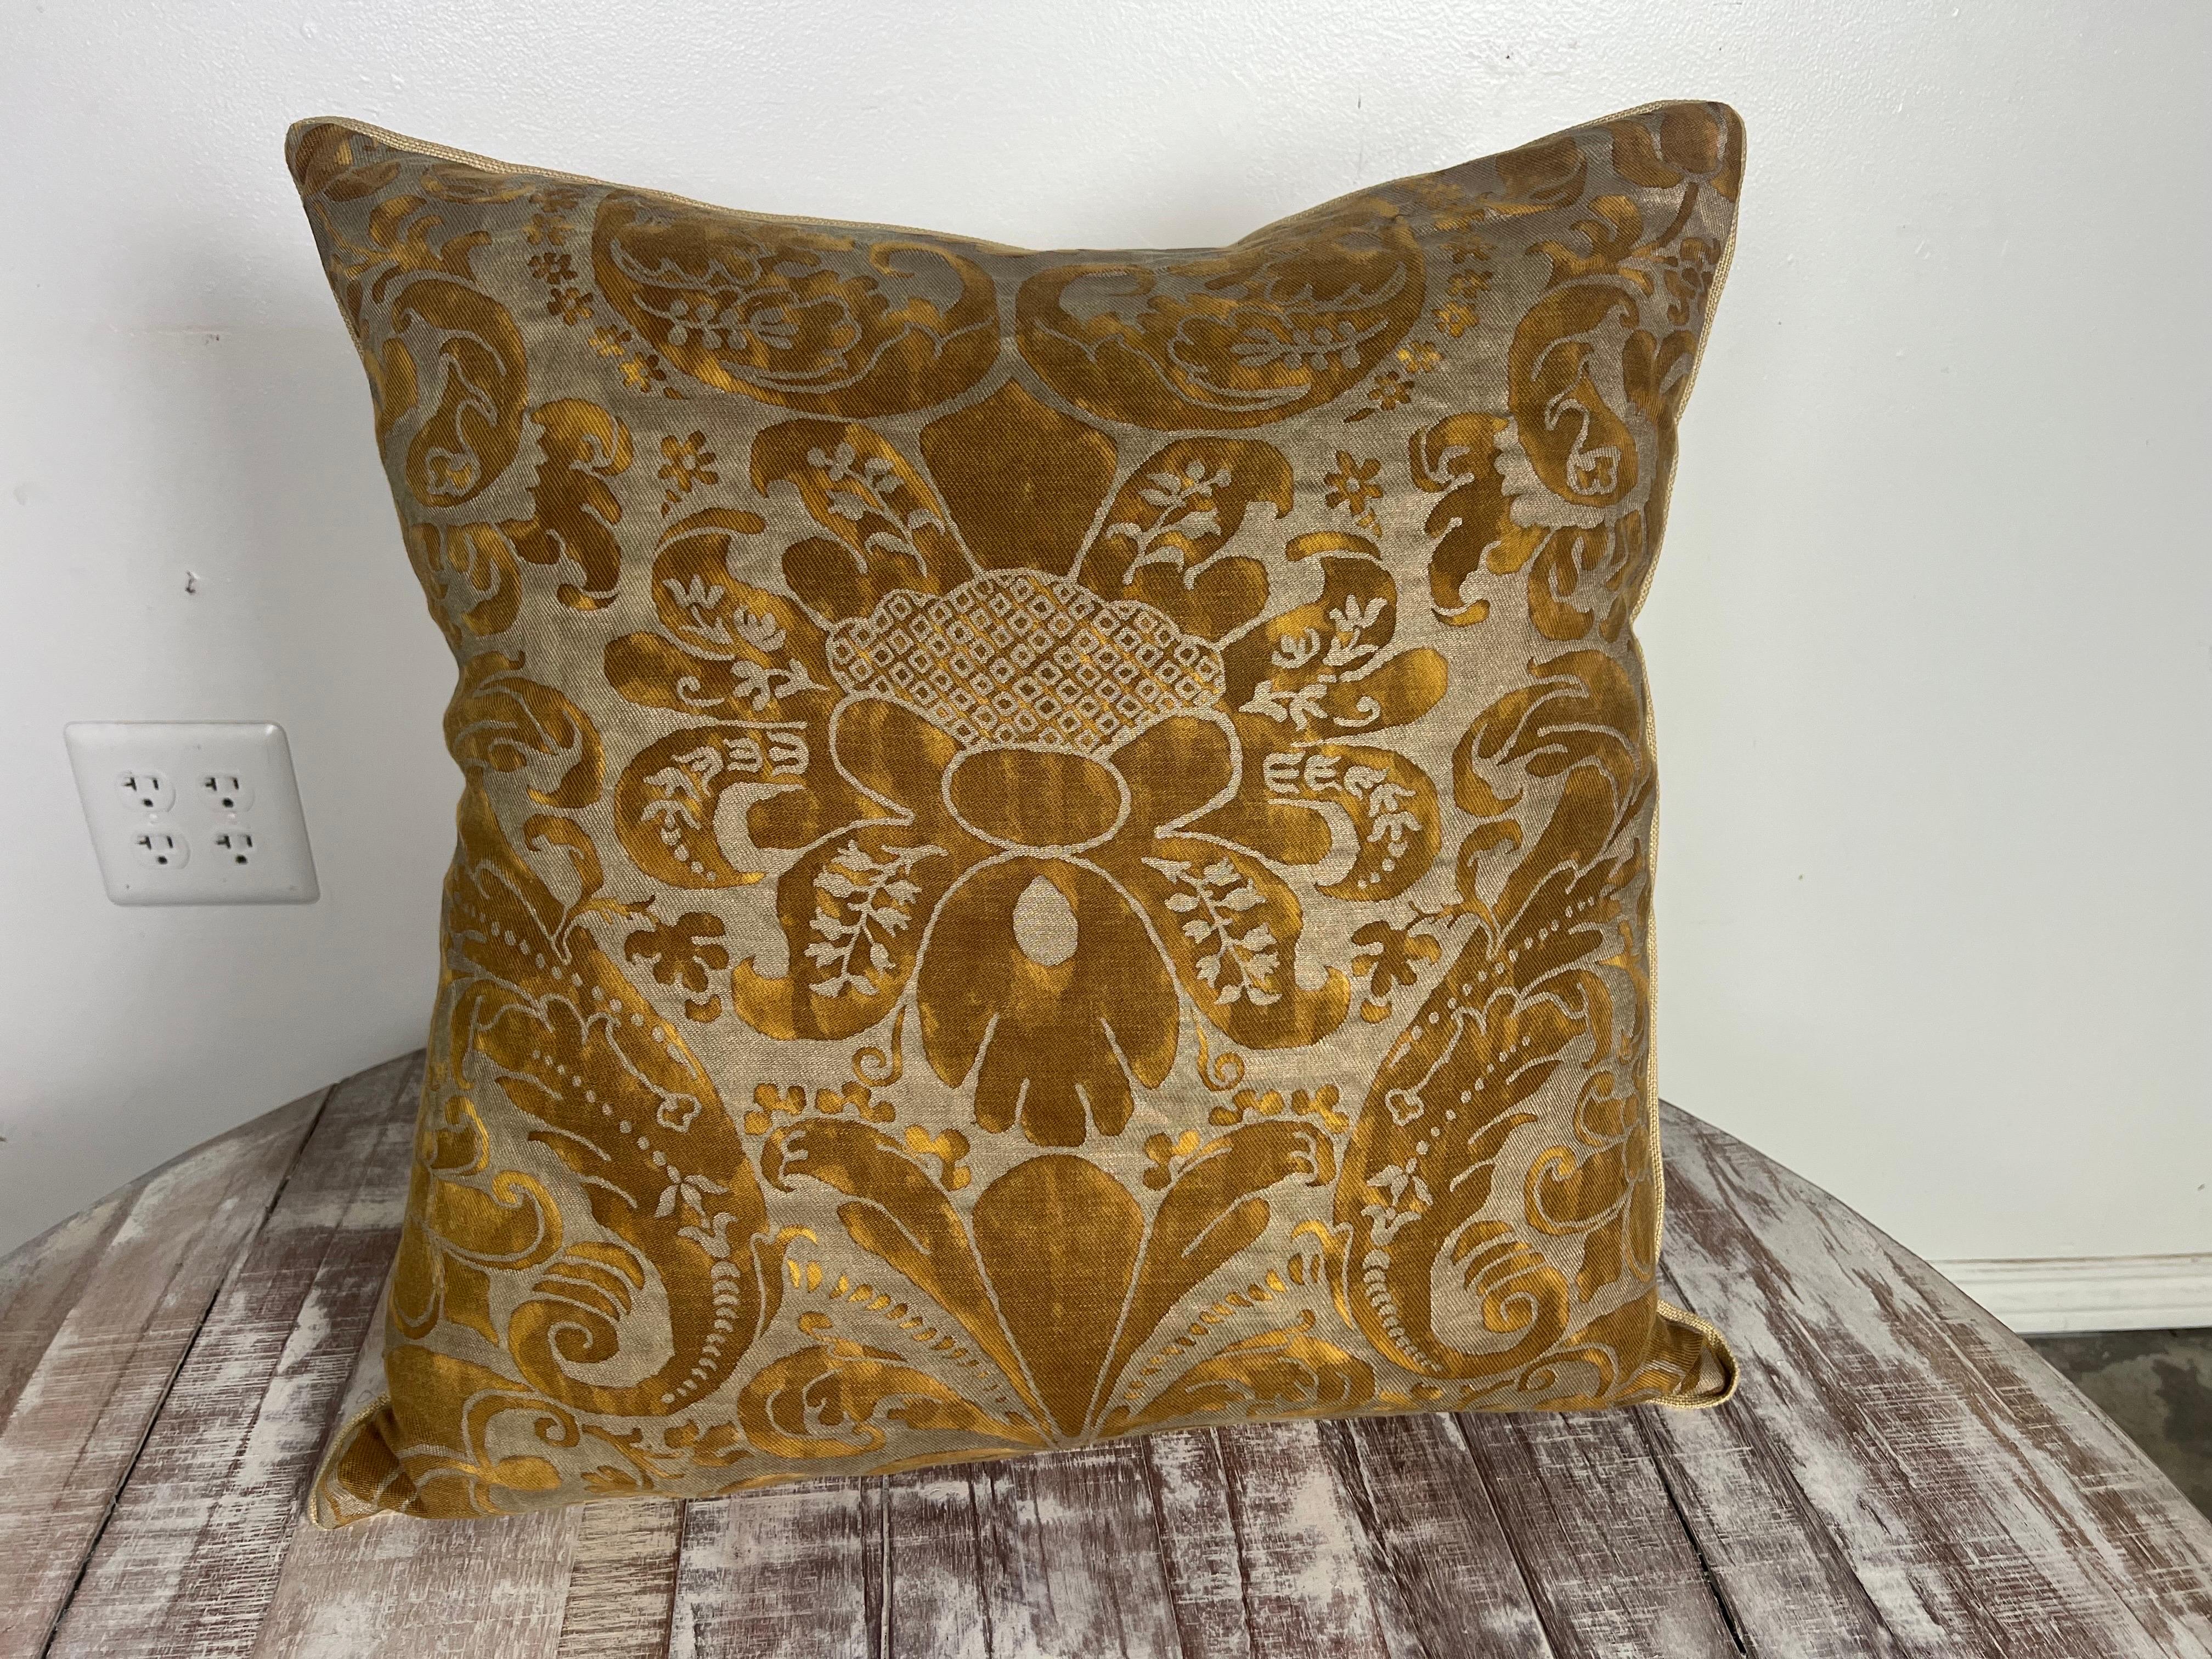 Custom pair of Fortuny pillows made with golden brown & metallic gold cotton fronts and butter colored linen backs.  Down inserts, zipper closures.